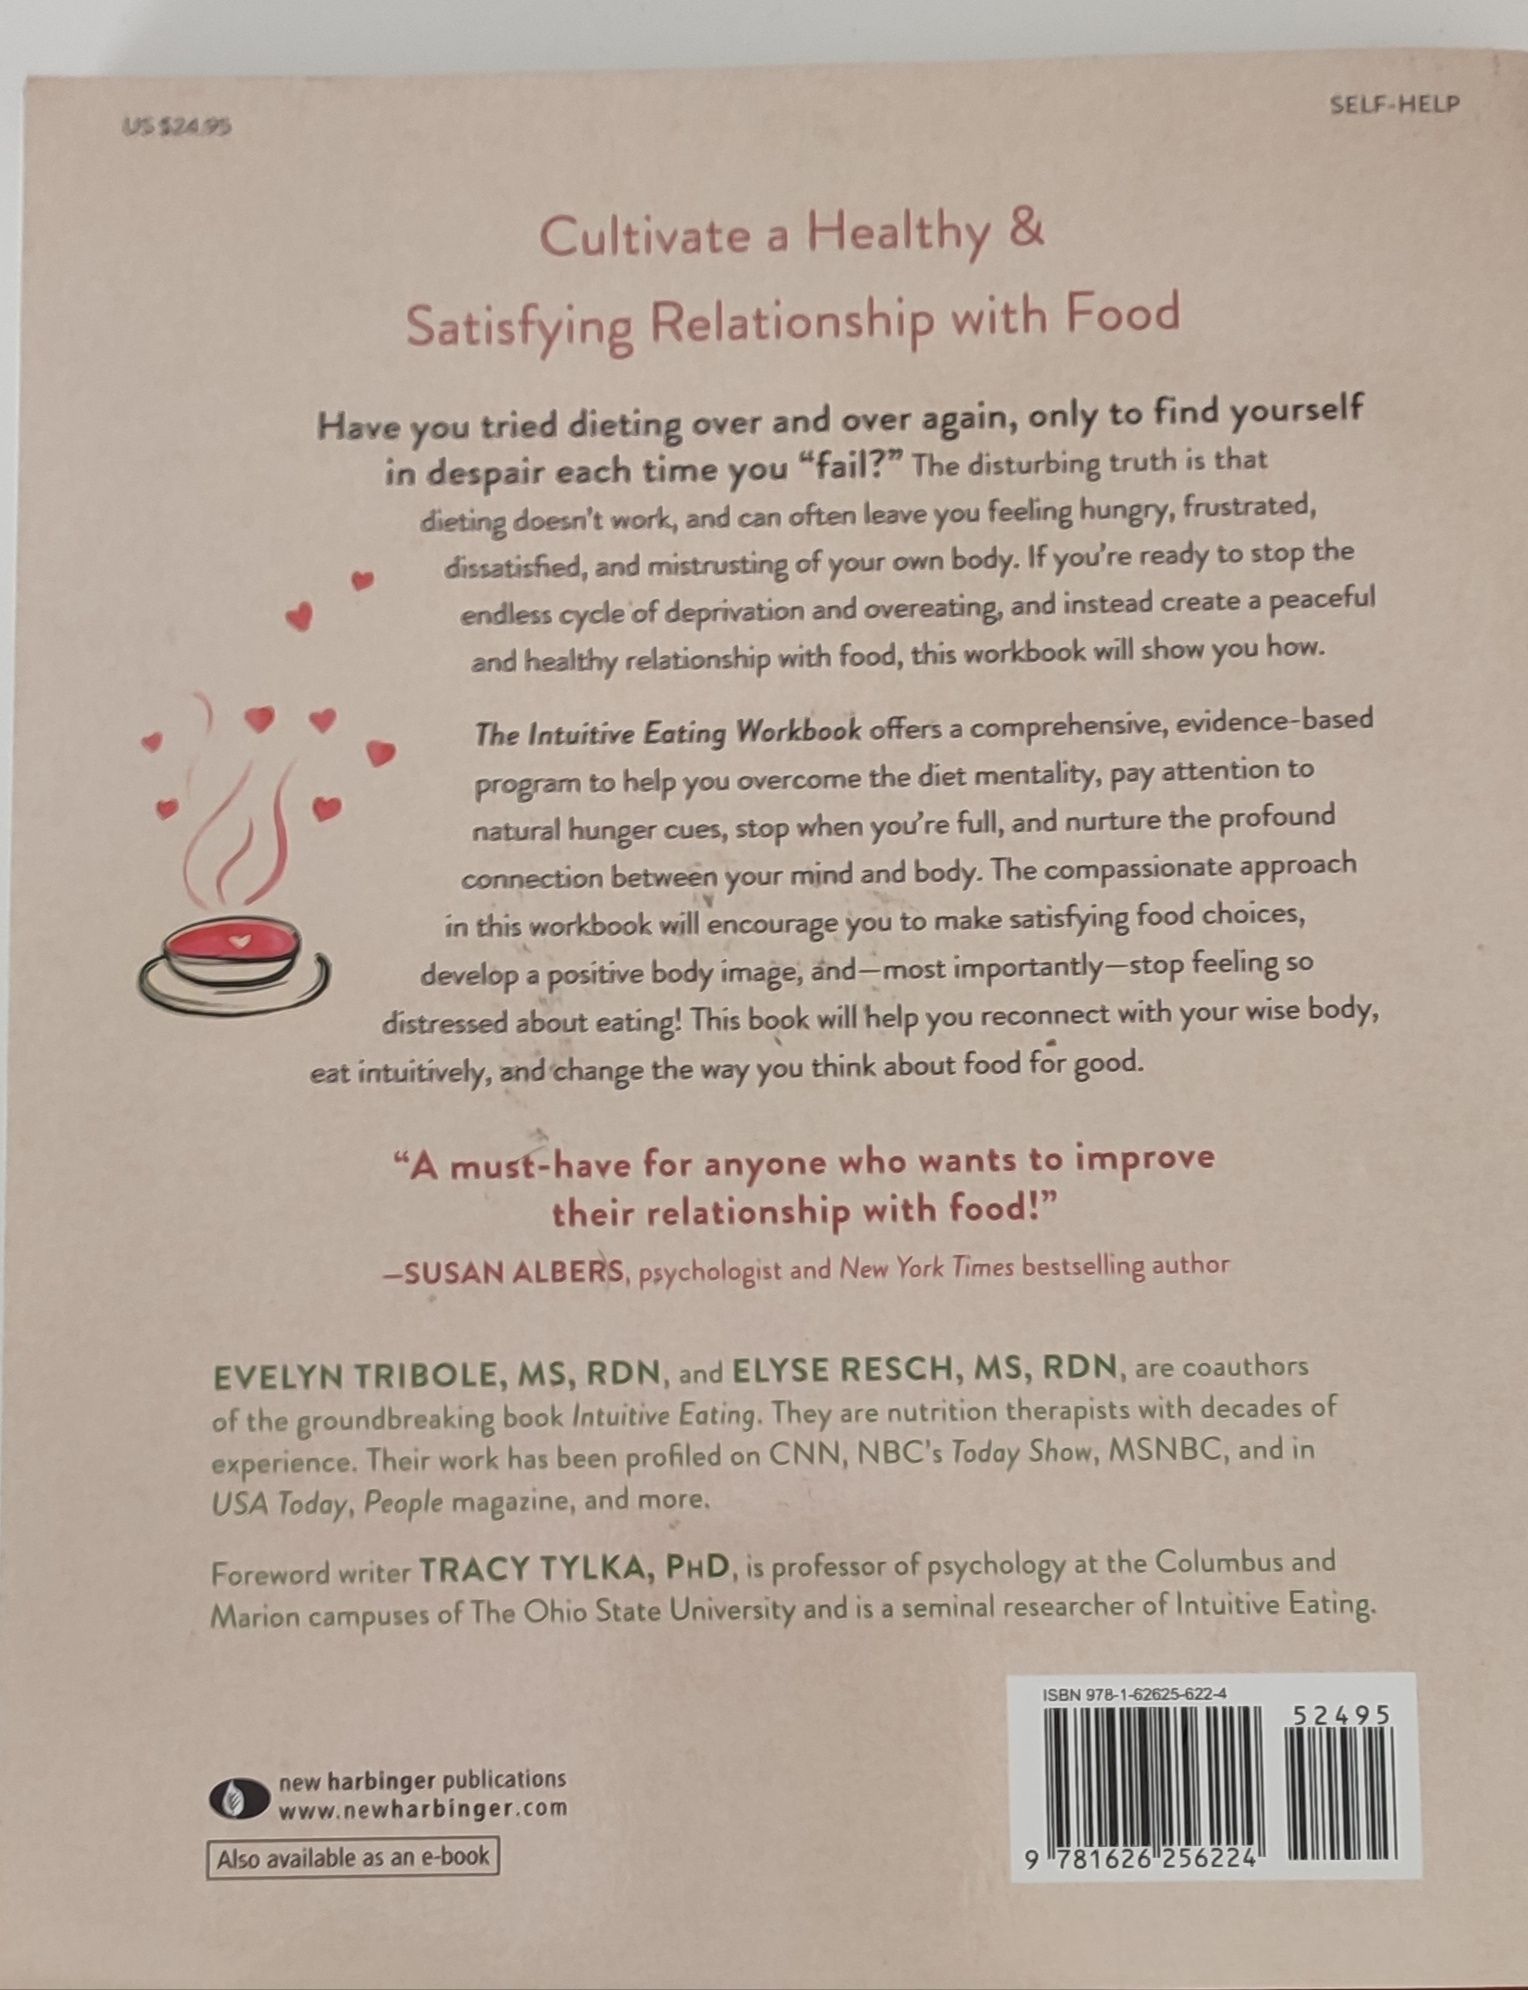 The intuitive eating workbook